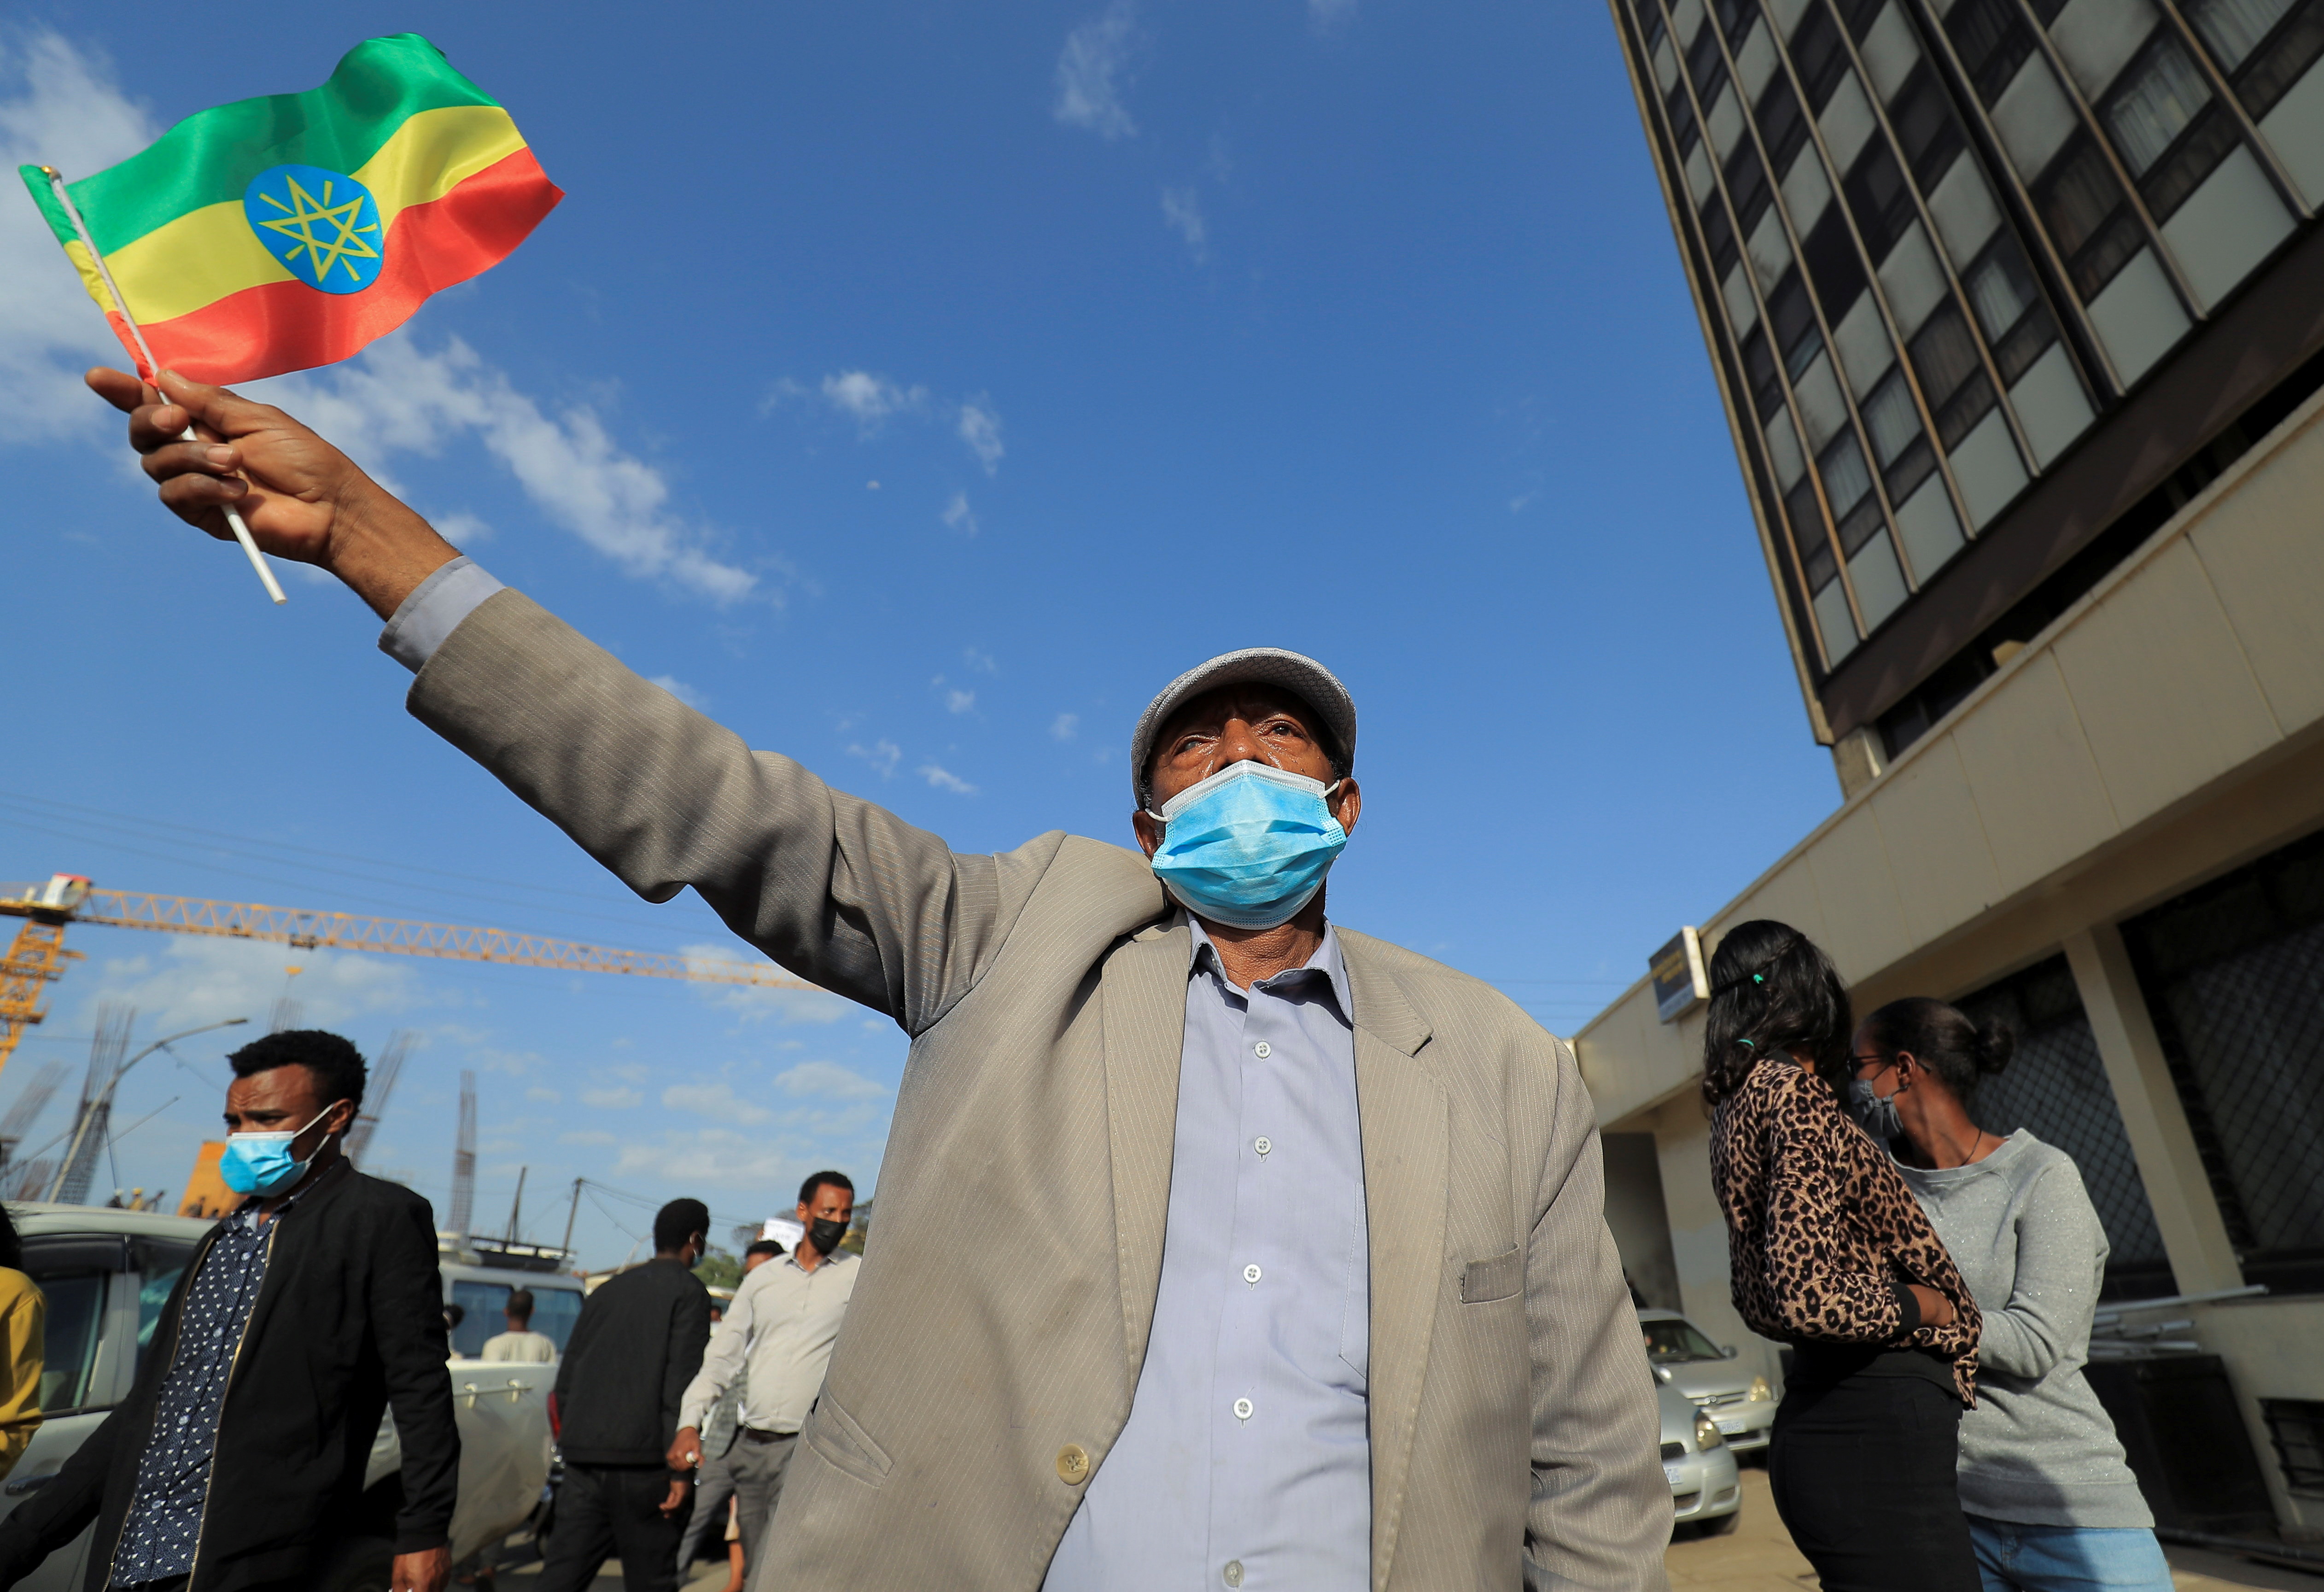 A man holds a national flag during a protest by people describing themselves as patriotic Ethiopians demonstrating against perceived interference by the western countries in their internal affairs in Addis Ababa